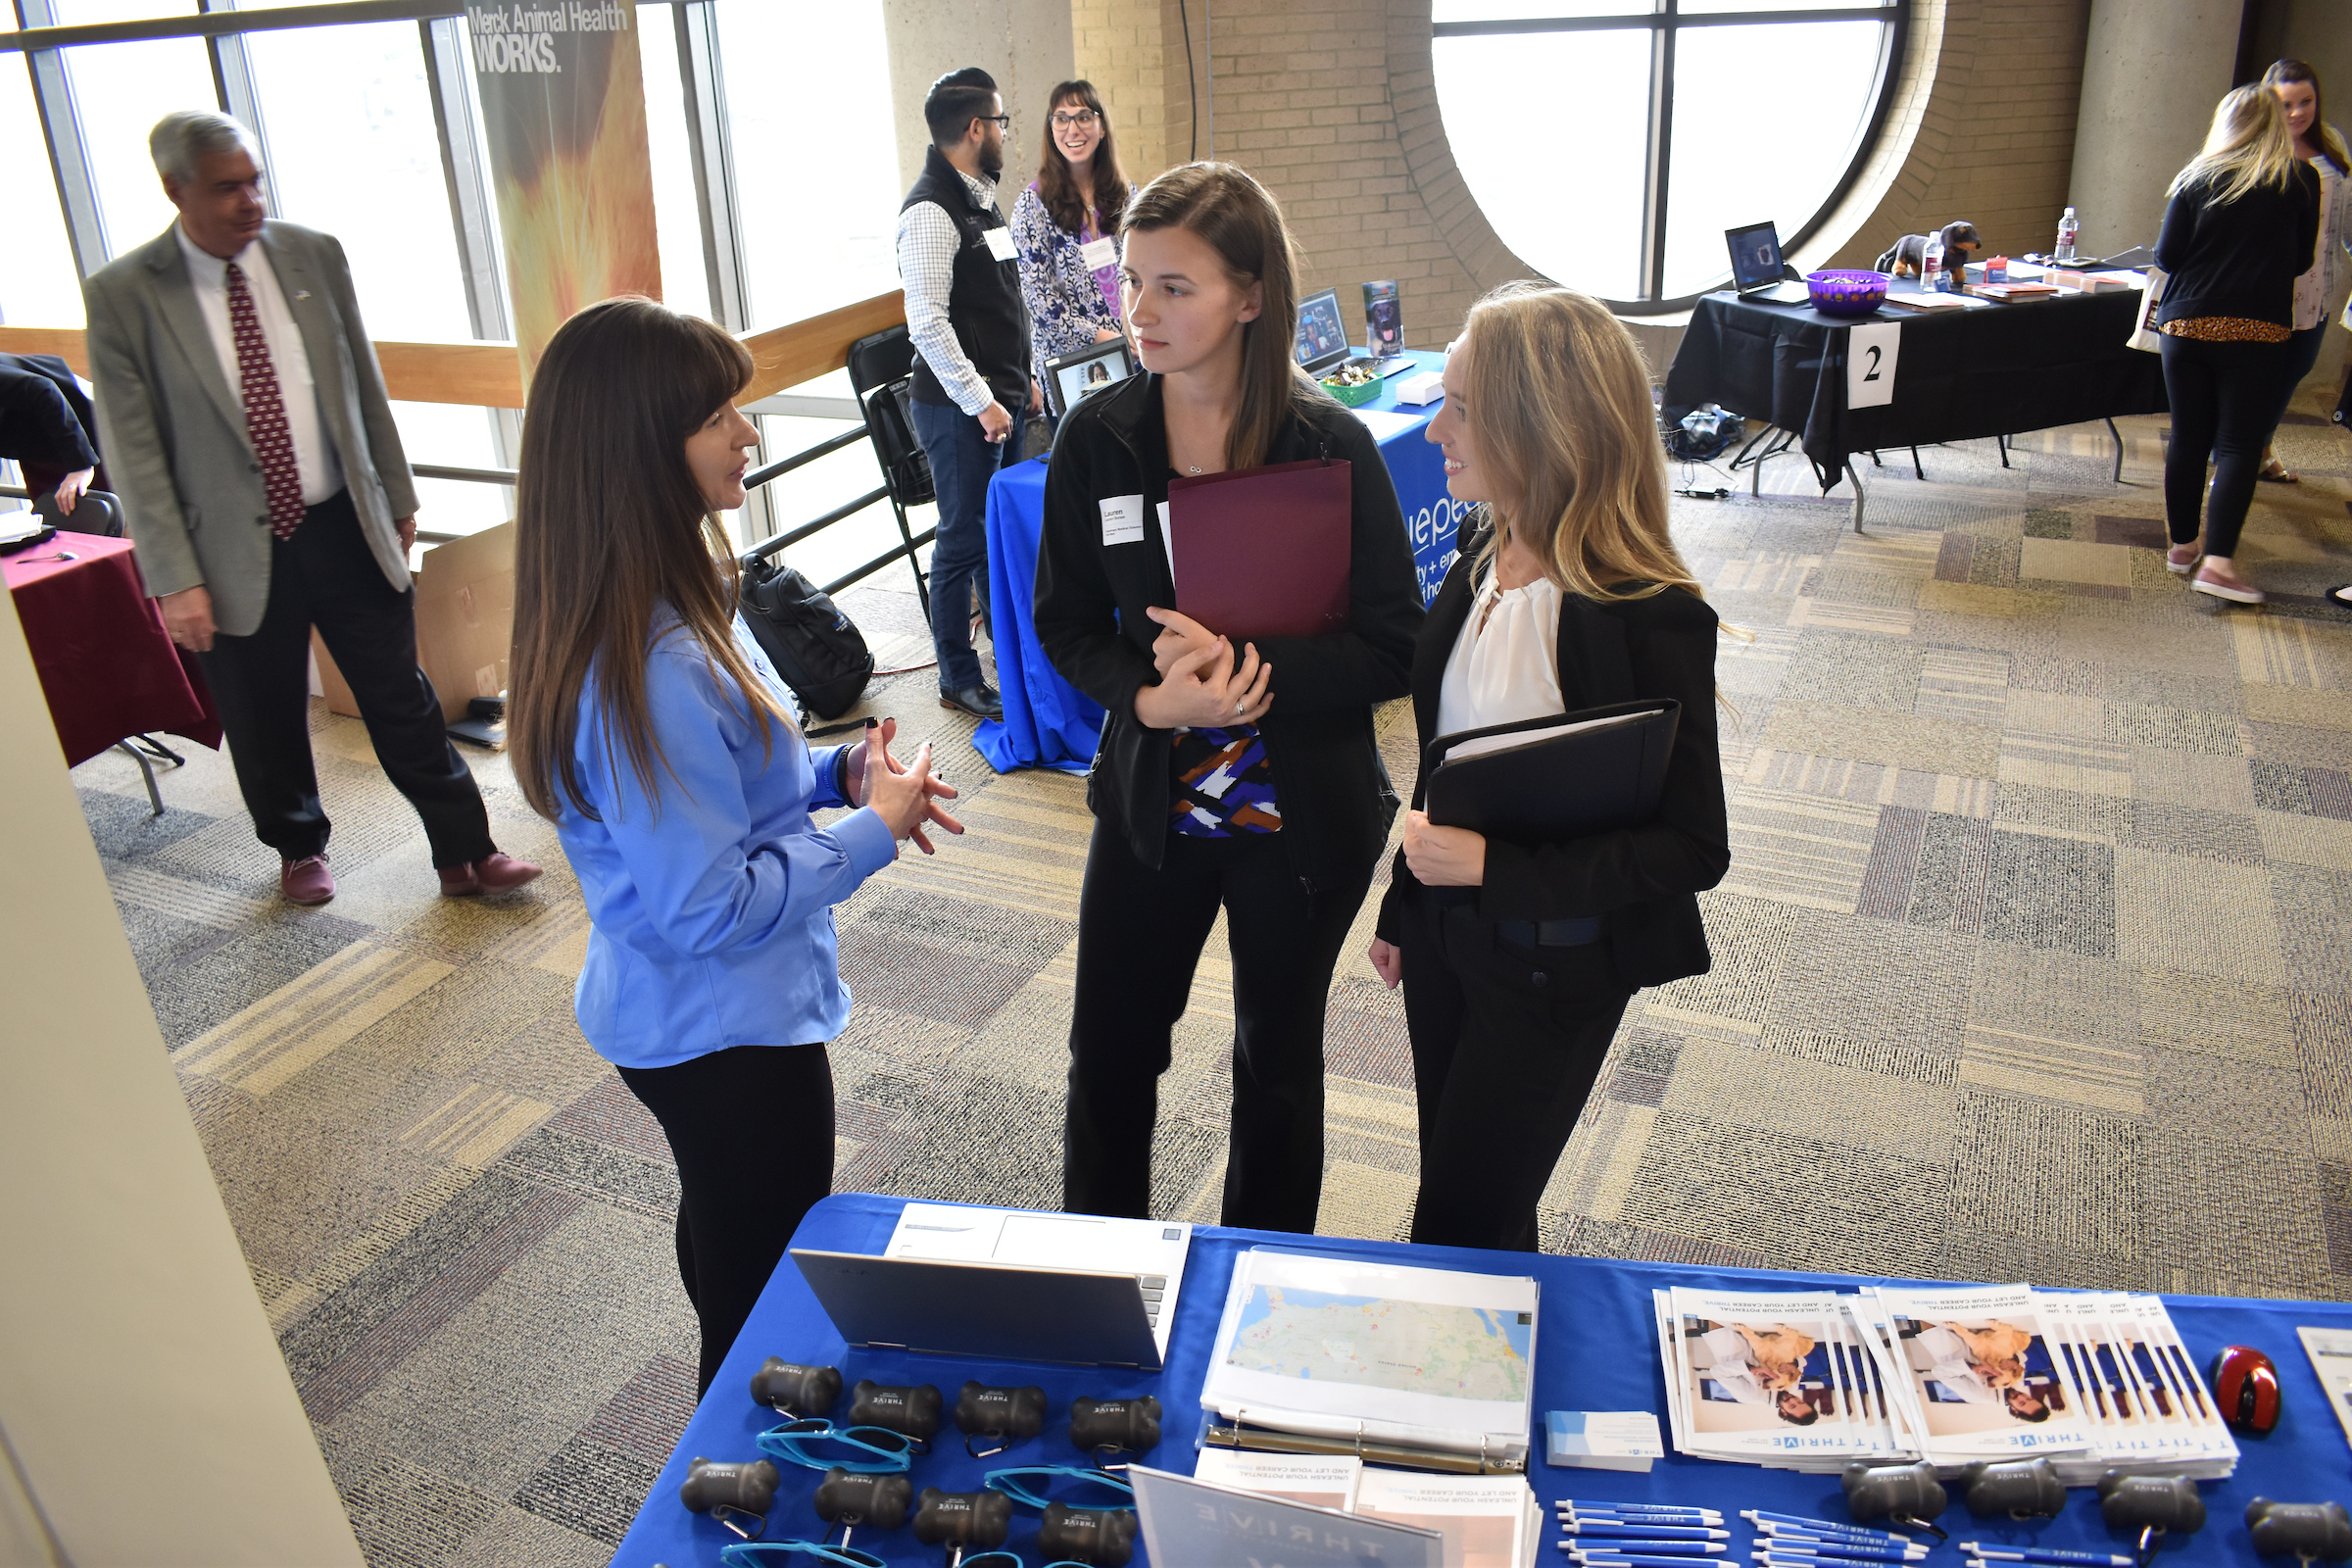 Students engage with a potential employer at a career fair